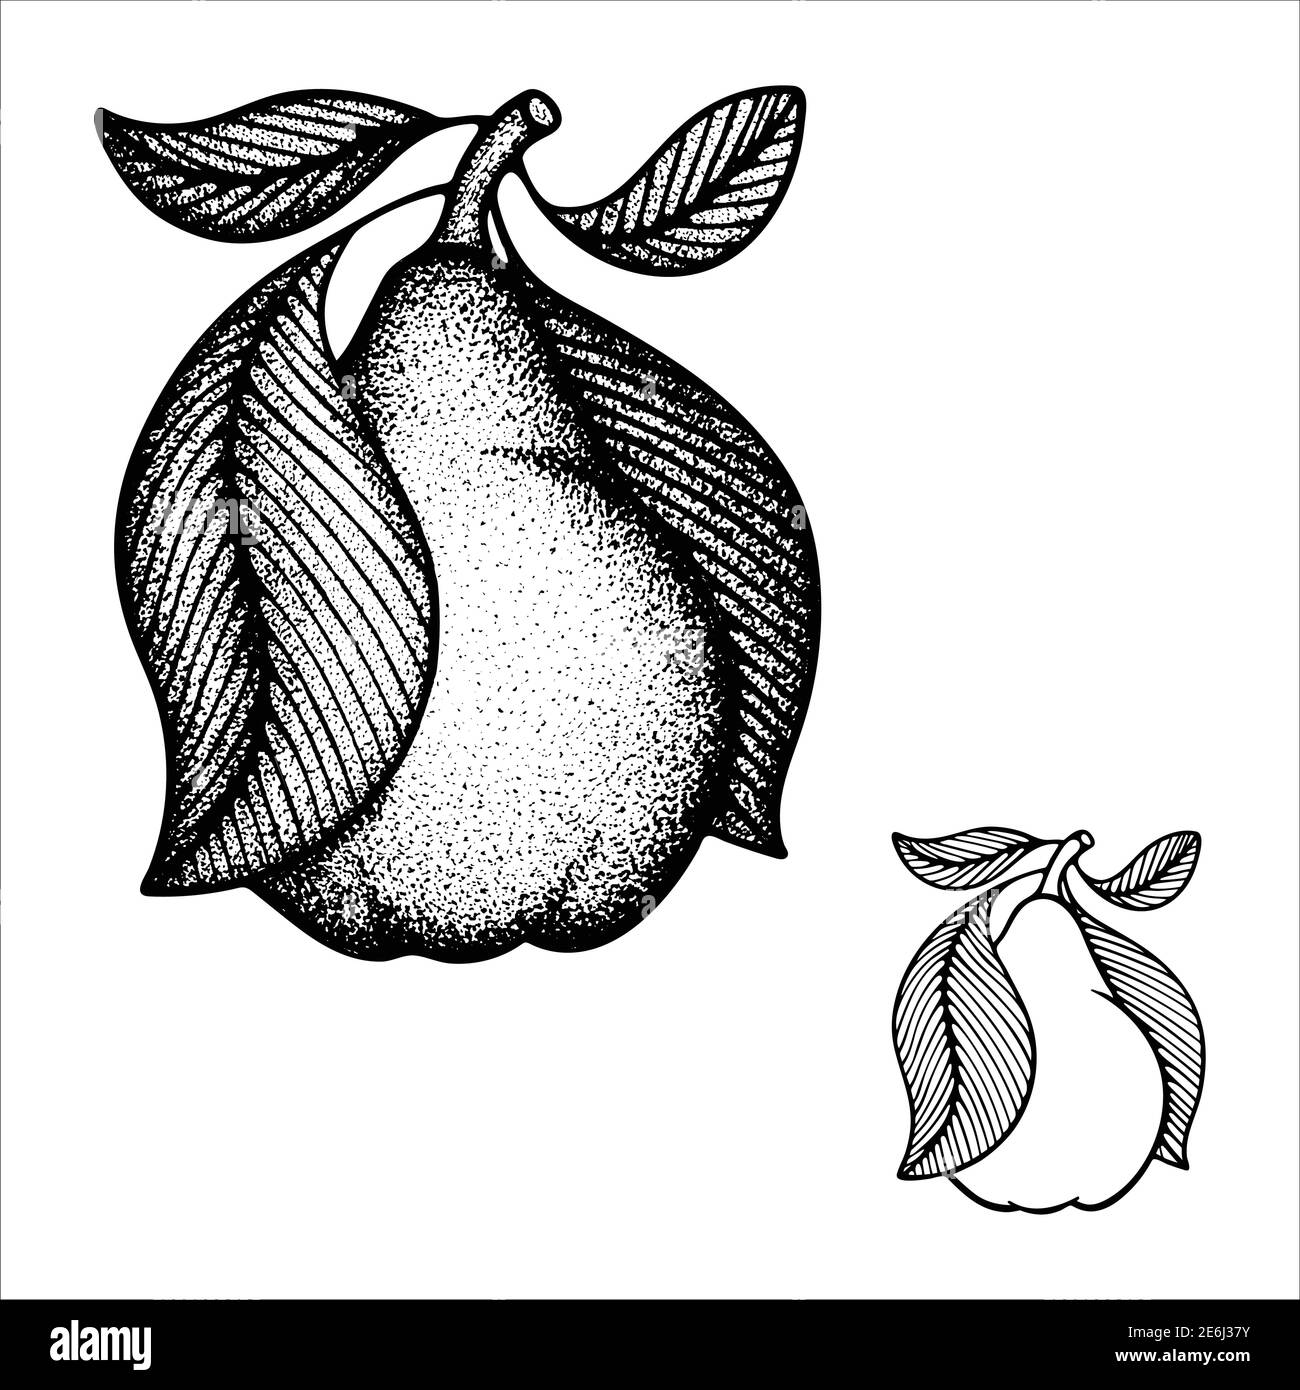 Pears hand drawn vintage style vector illustration. Engraving, retro style drawing pears with leaves. Dotted pears graphic. Part of set. Stock Vector